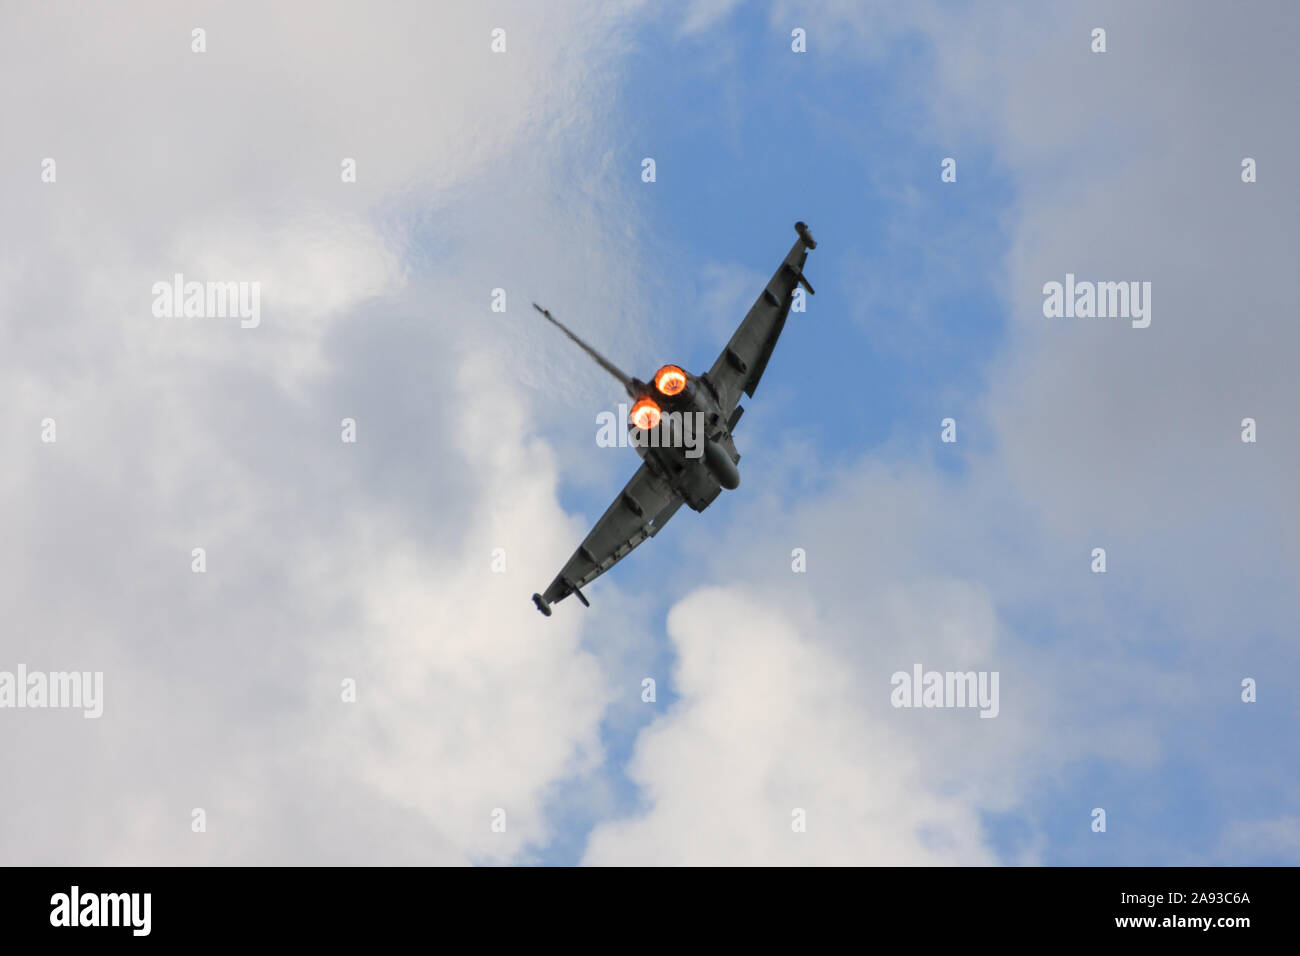 Rear view of an airborne RAF Typhoon multirole jet fighter, showing the engines re-heat (afterburners) full on. Climbing out against a blue sky. Stock Photo